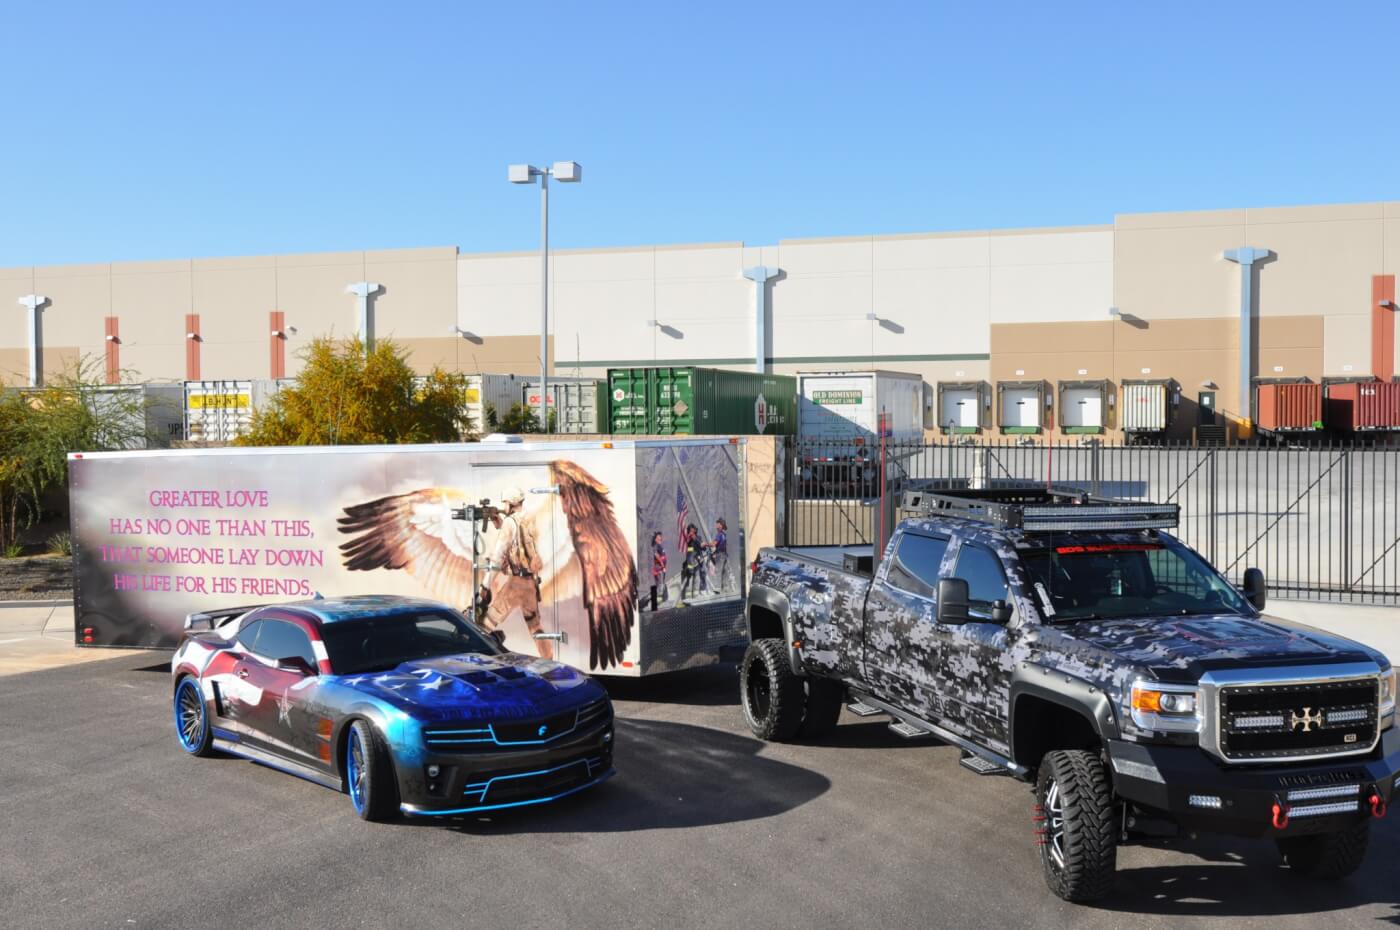 Kelly Fromm is passionate about helping wounded warriors and he takes his decked-out Camaro all over the country to raise awareness. He uses this 2015 GMC Denali to haul the car and trailer.